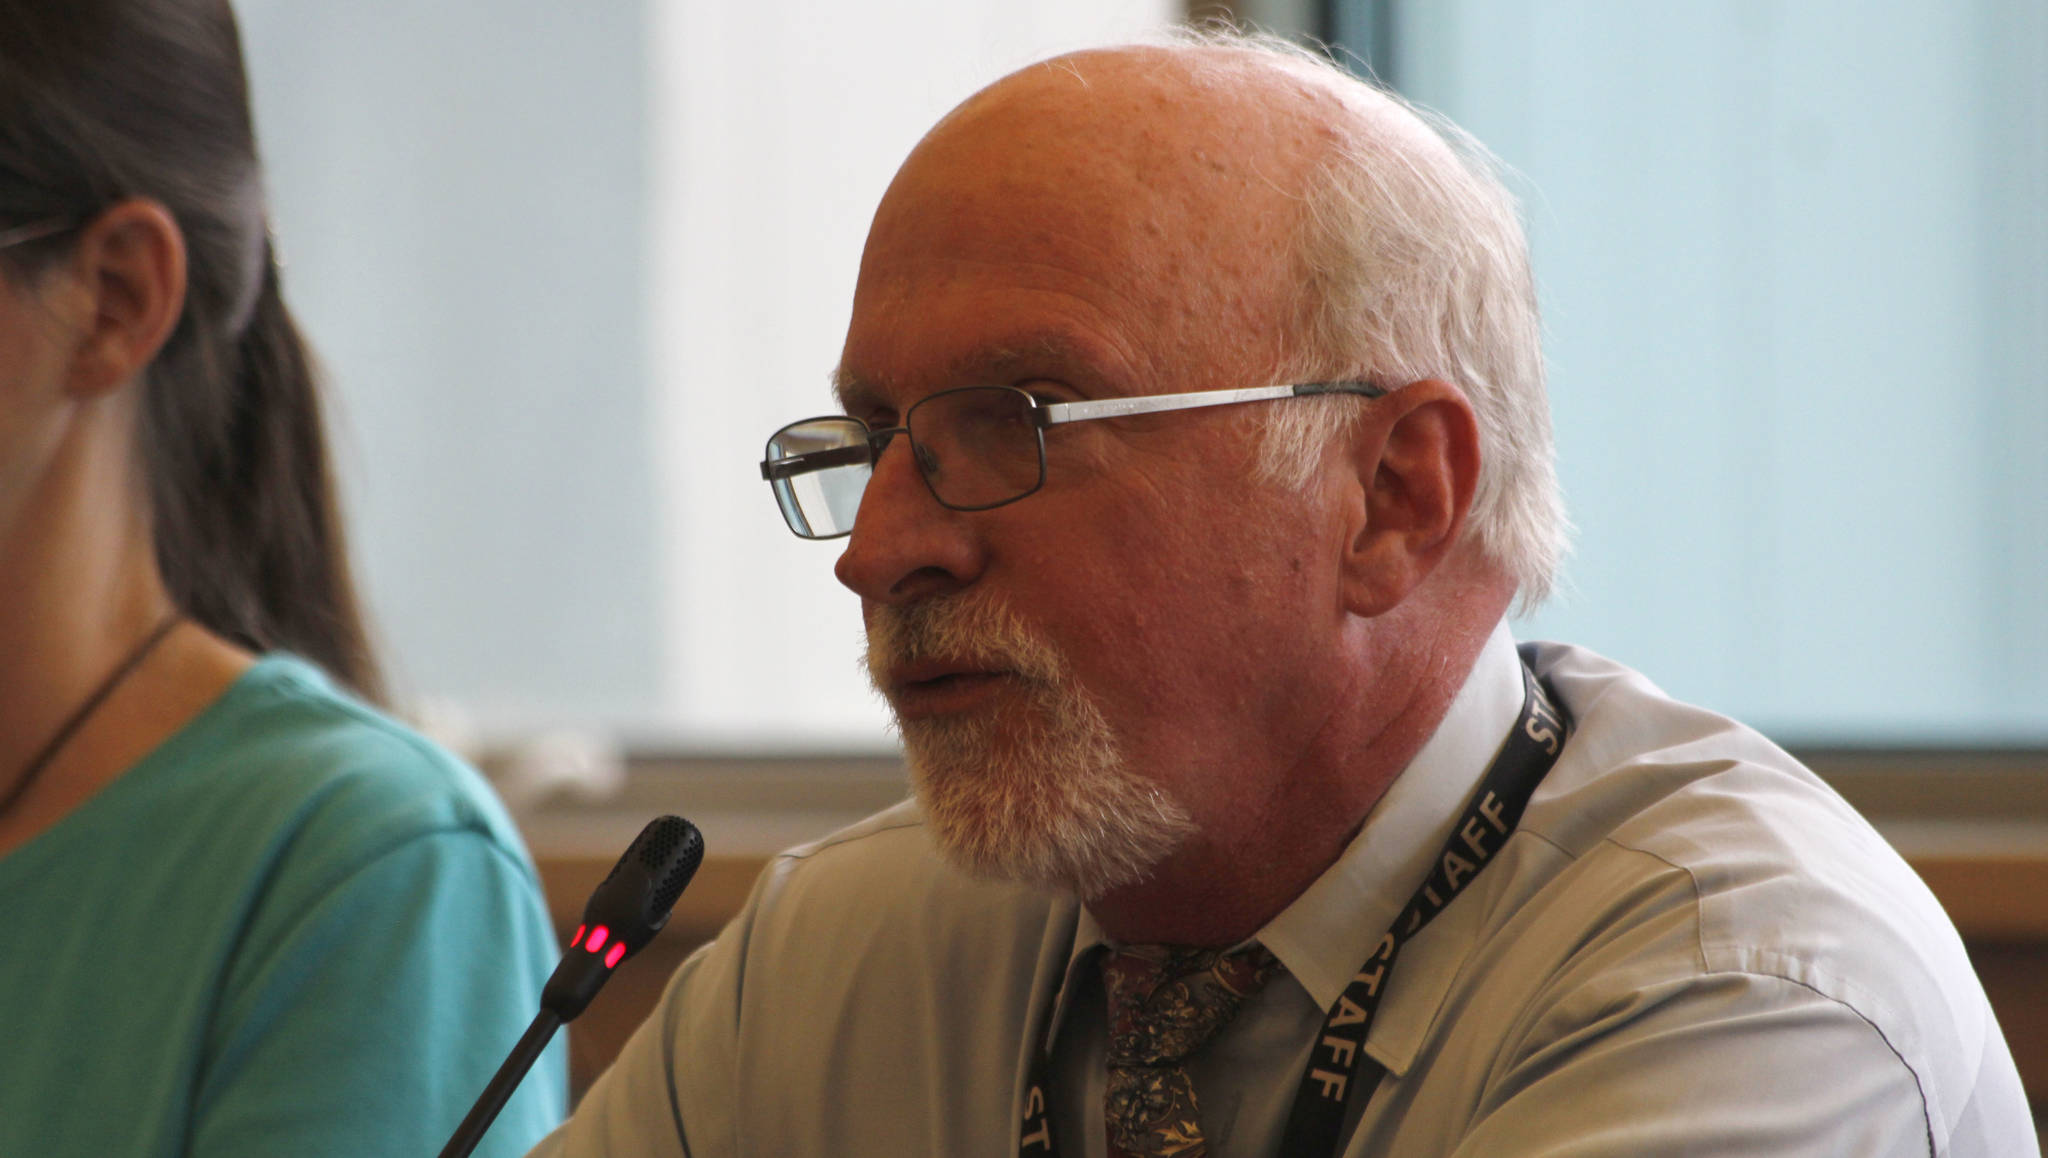 Juneau School District Superintendent Mark Miller speaks during a Board of Education meeting on Friday, July 27, 2018. The board unanimously voted to release Miller from his contract after he submitted his resignation Wednesday. (Alex McCarthy | Juneau Empire)